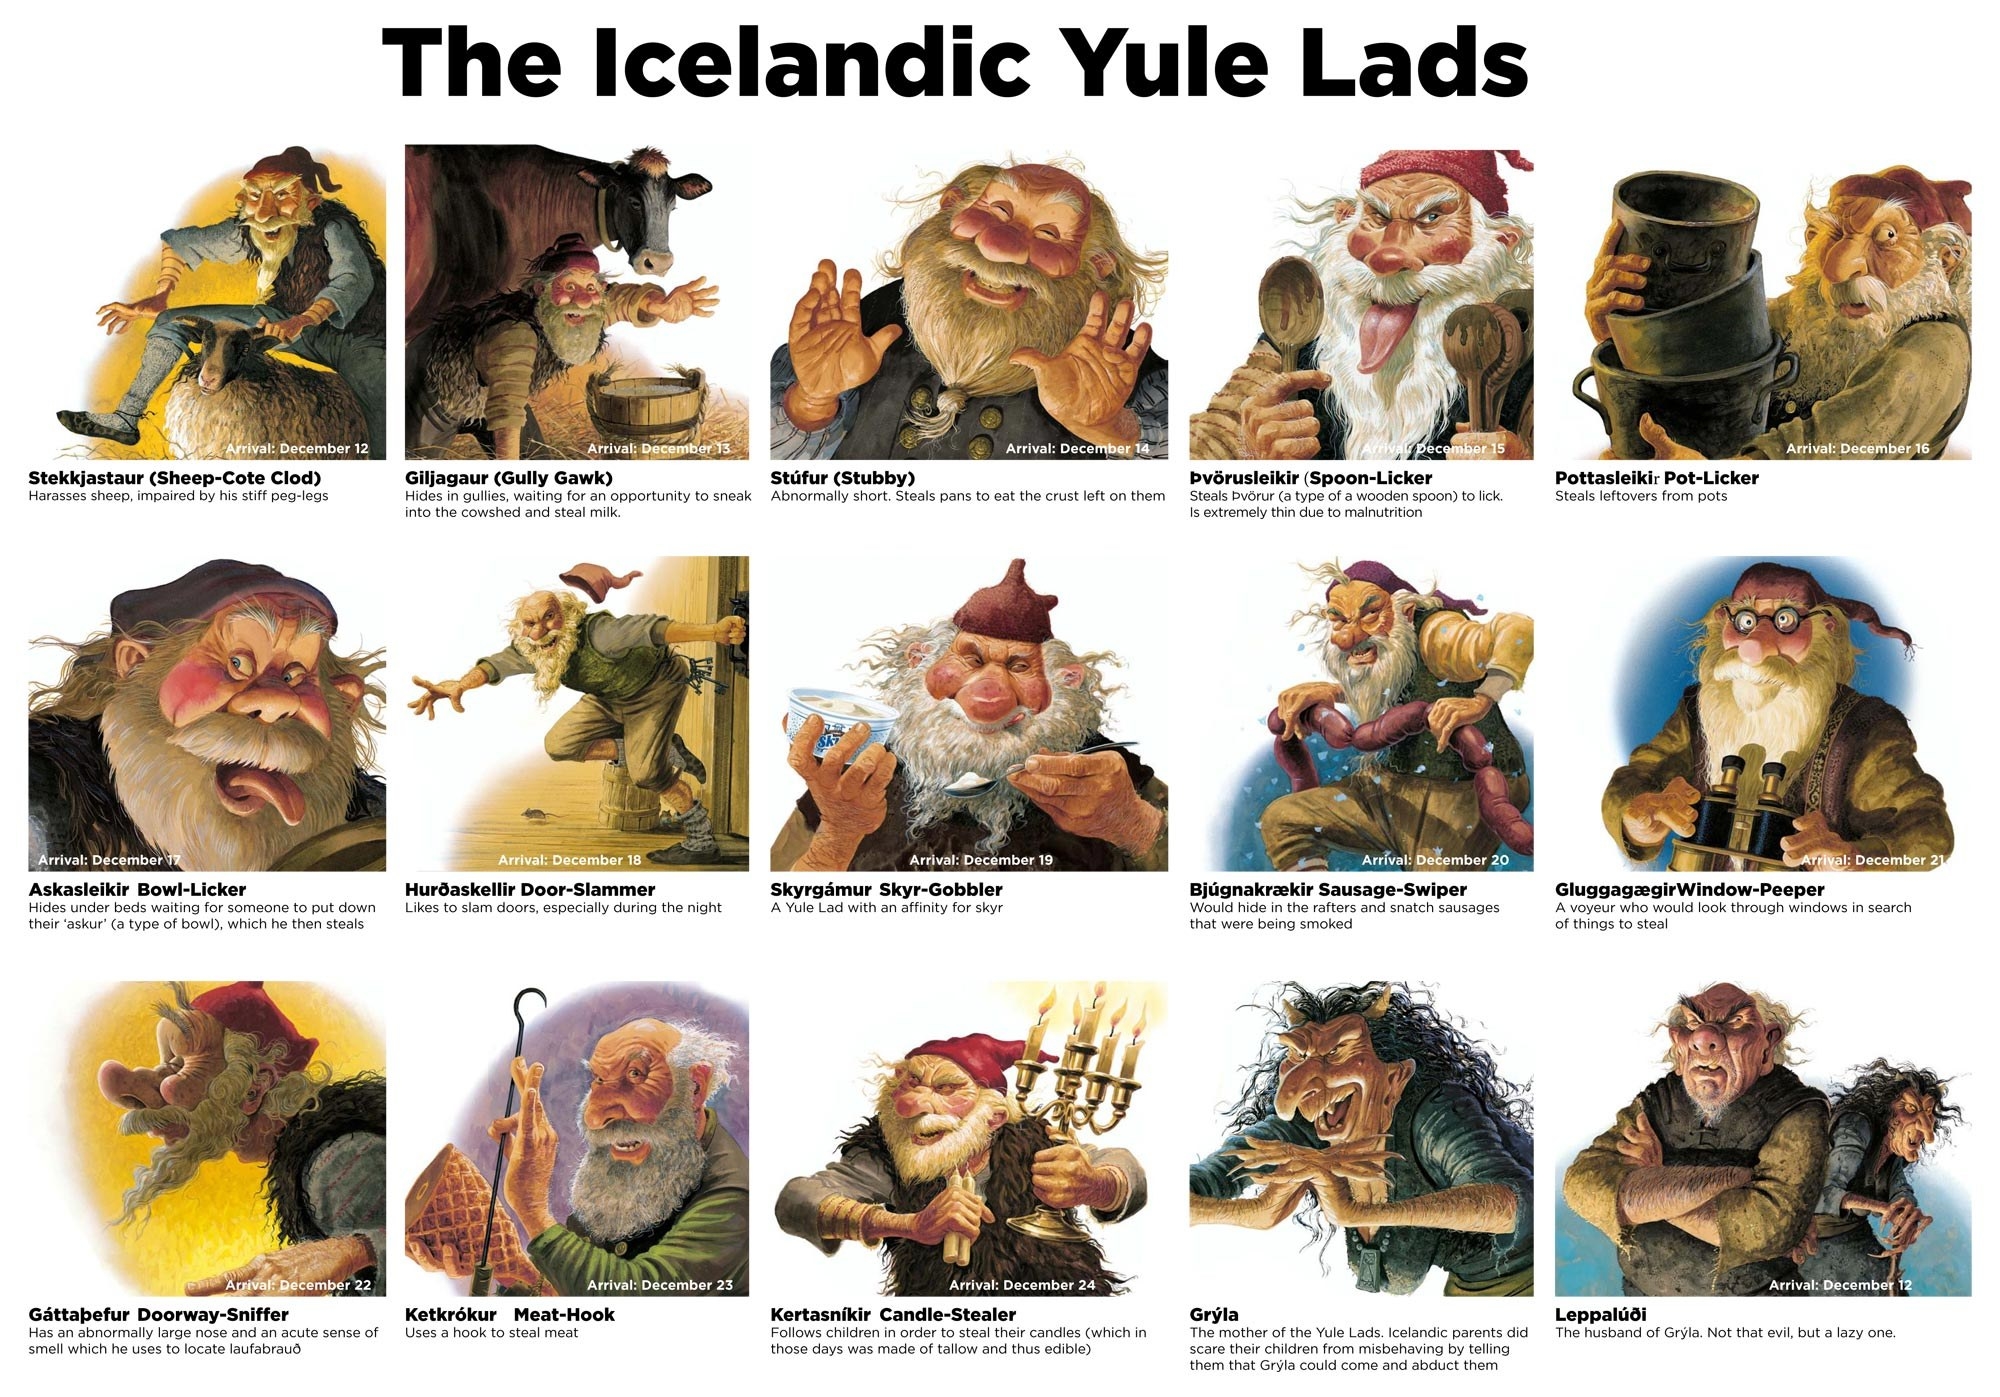 Drawings of all 13 Yule Lads ranging from kooky Santa Claus-like to evil-looking